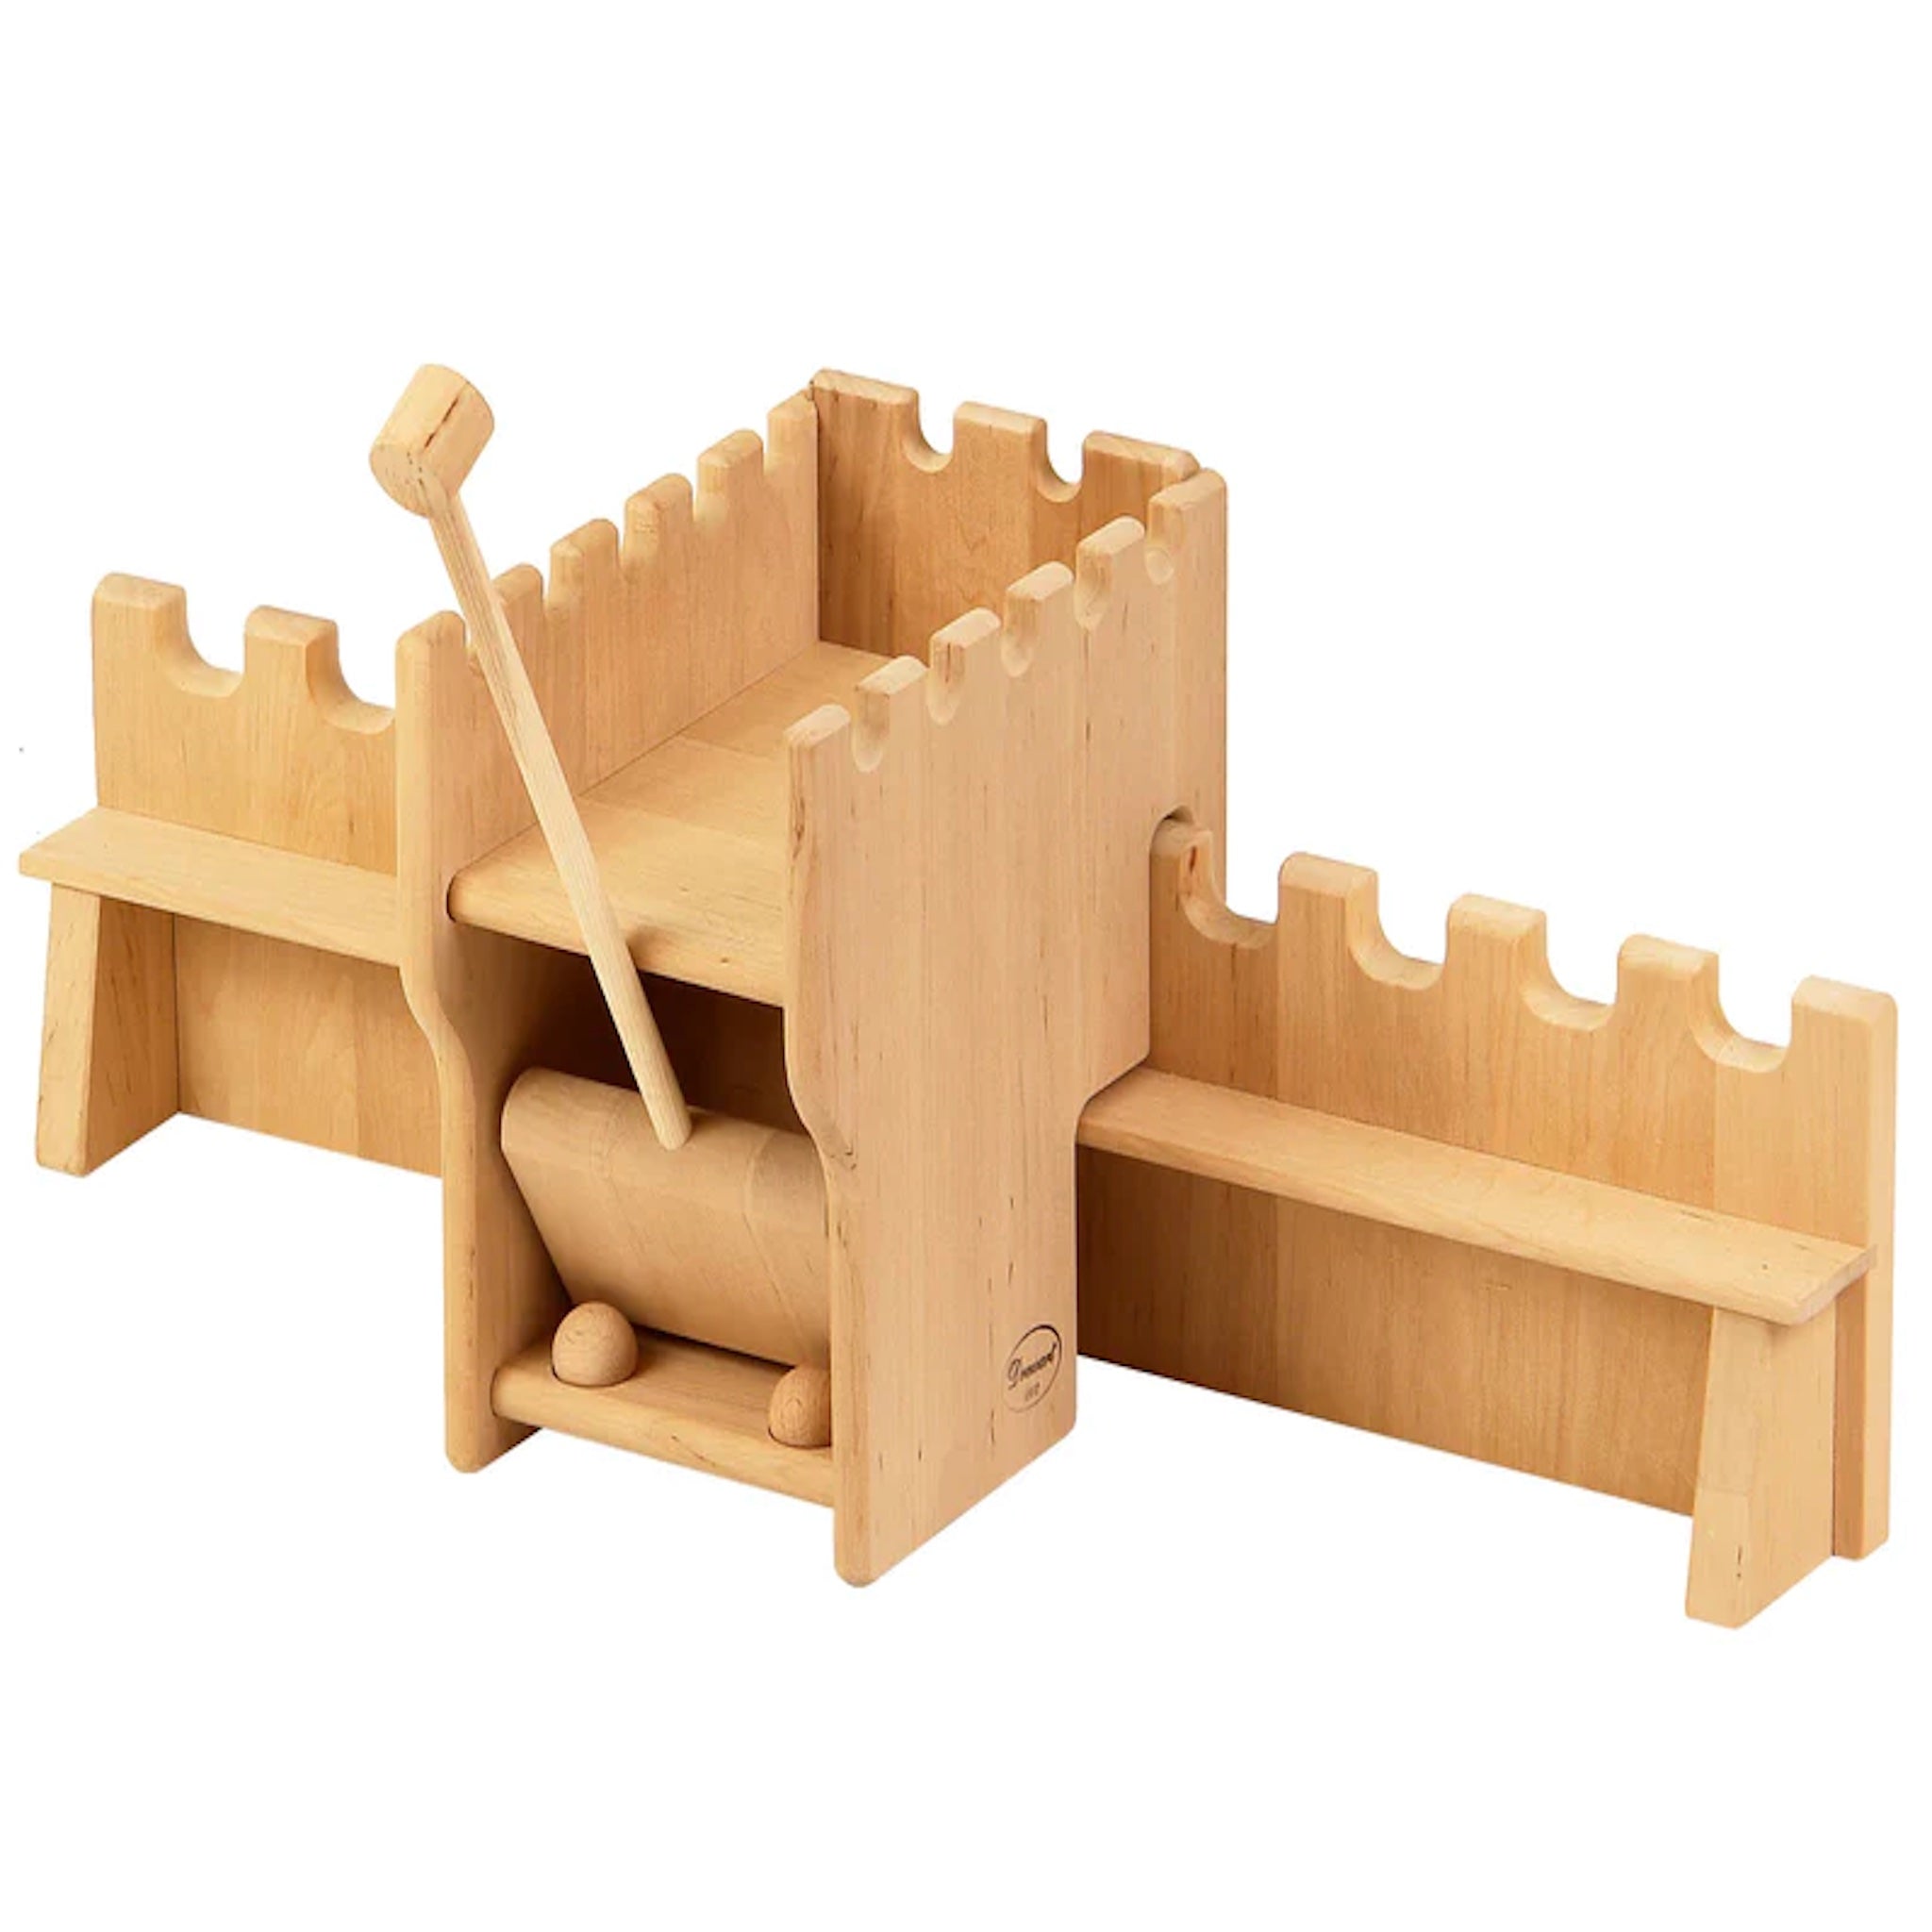 Defensive Catapult for all your castle walls